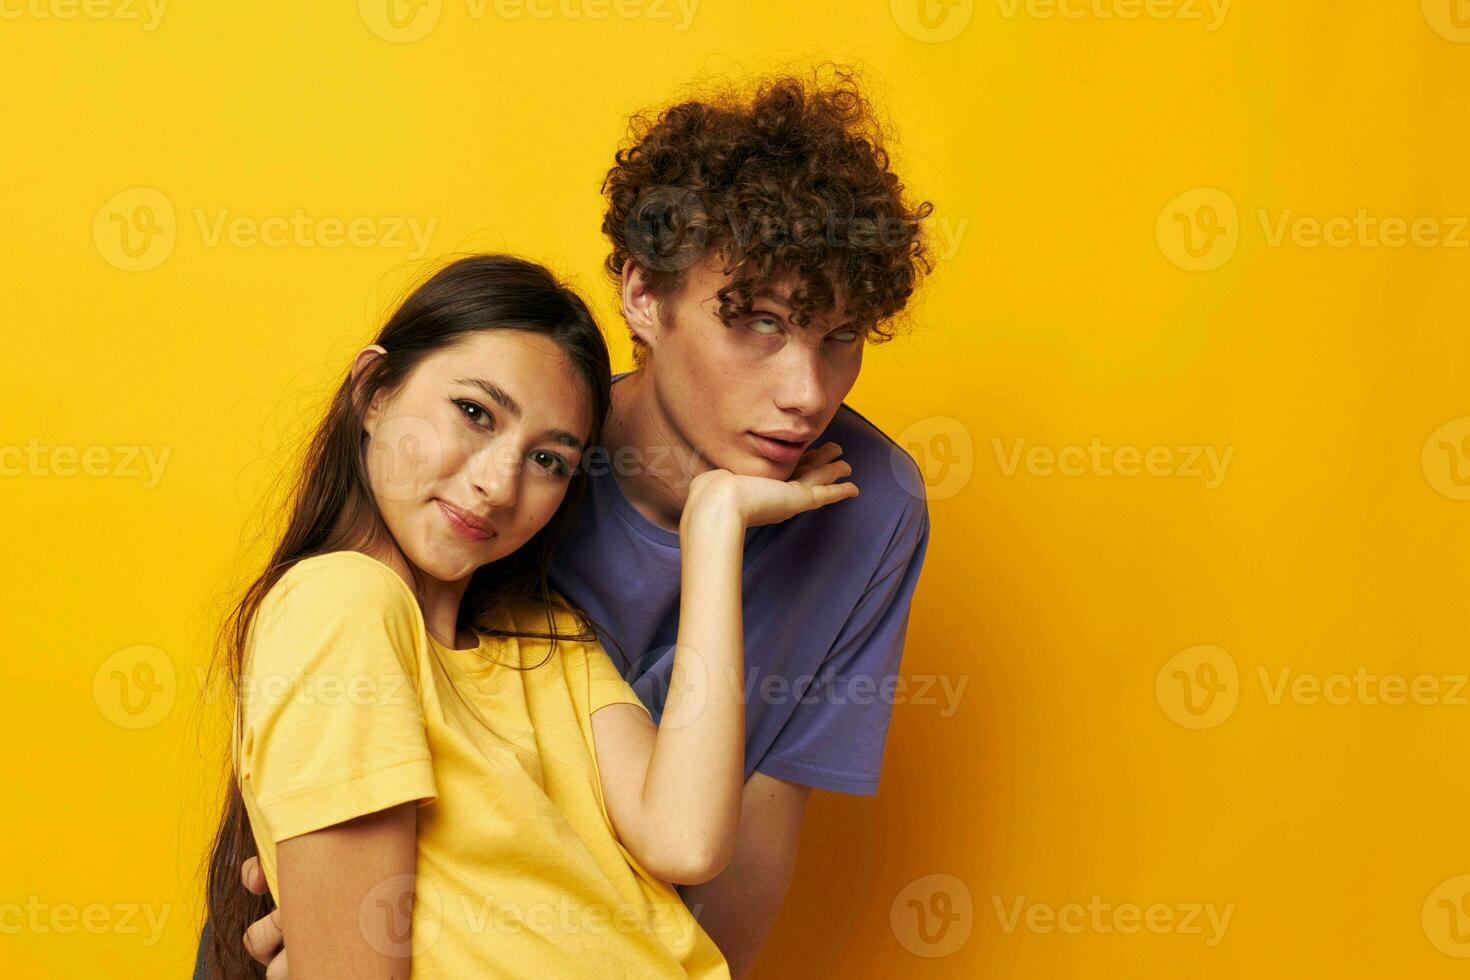 portrait of a man and a woman in colorful t-shirts posing friendship fun yellow background unaltered photo